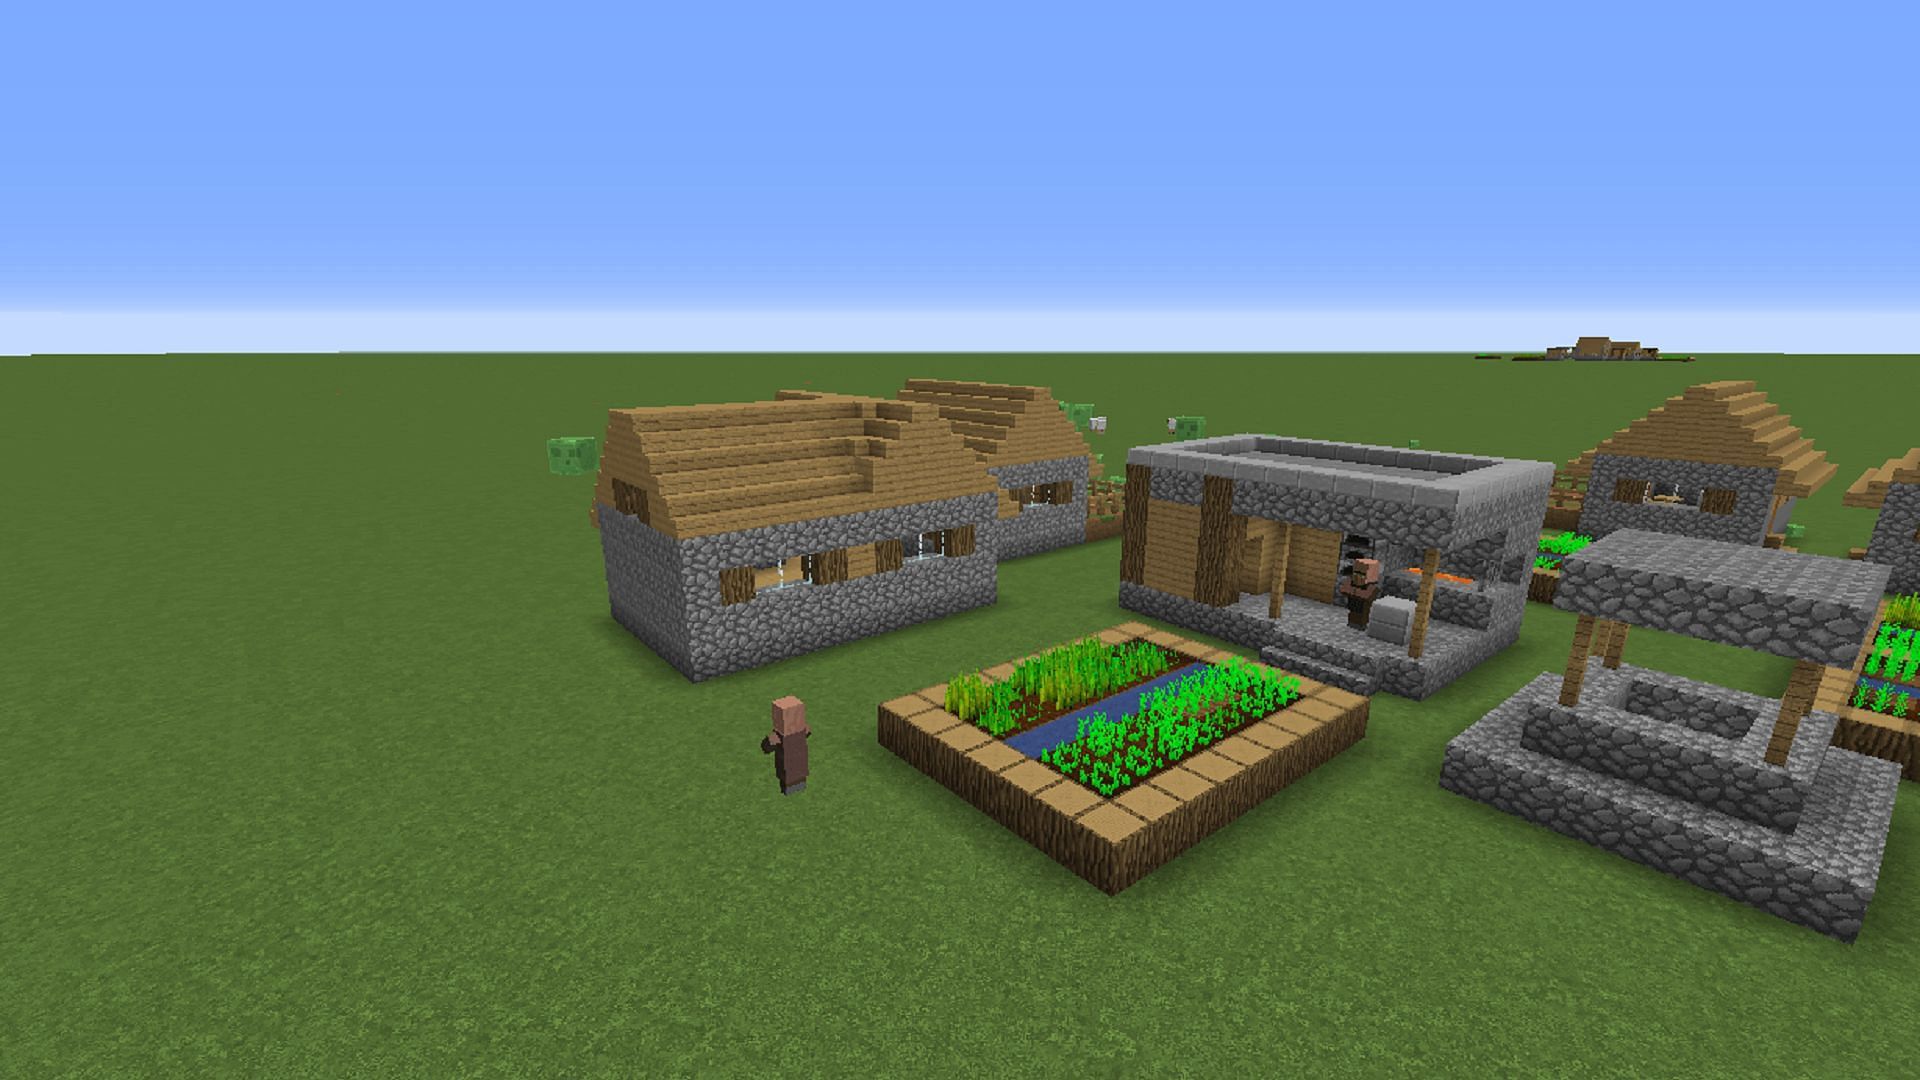 Certain structures, like villages, can still spawn in flat worlds (Image via Mojang)